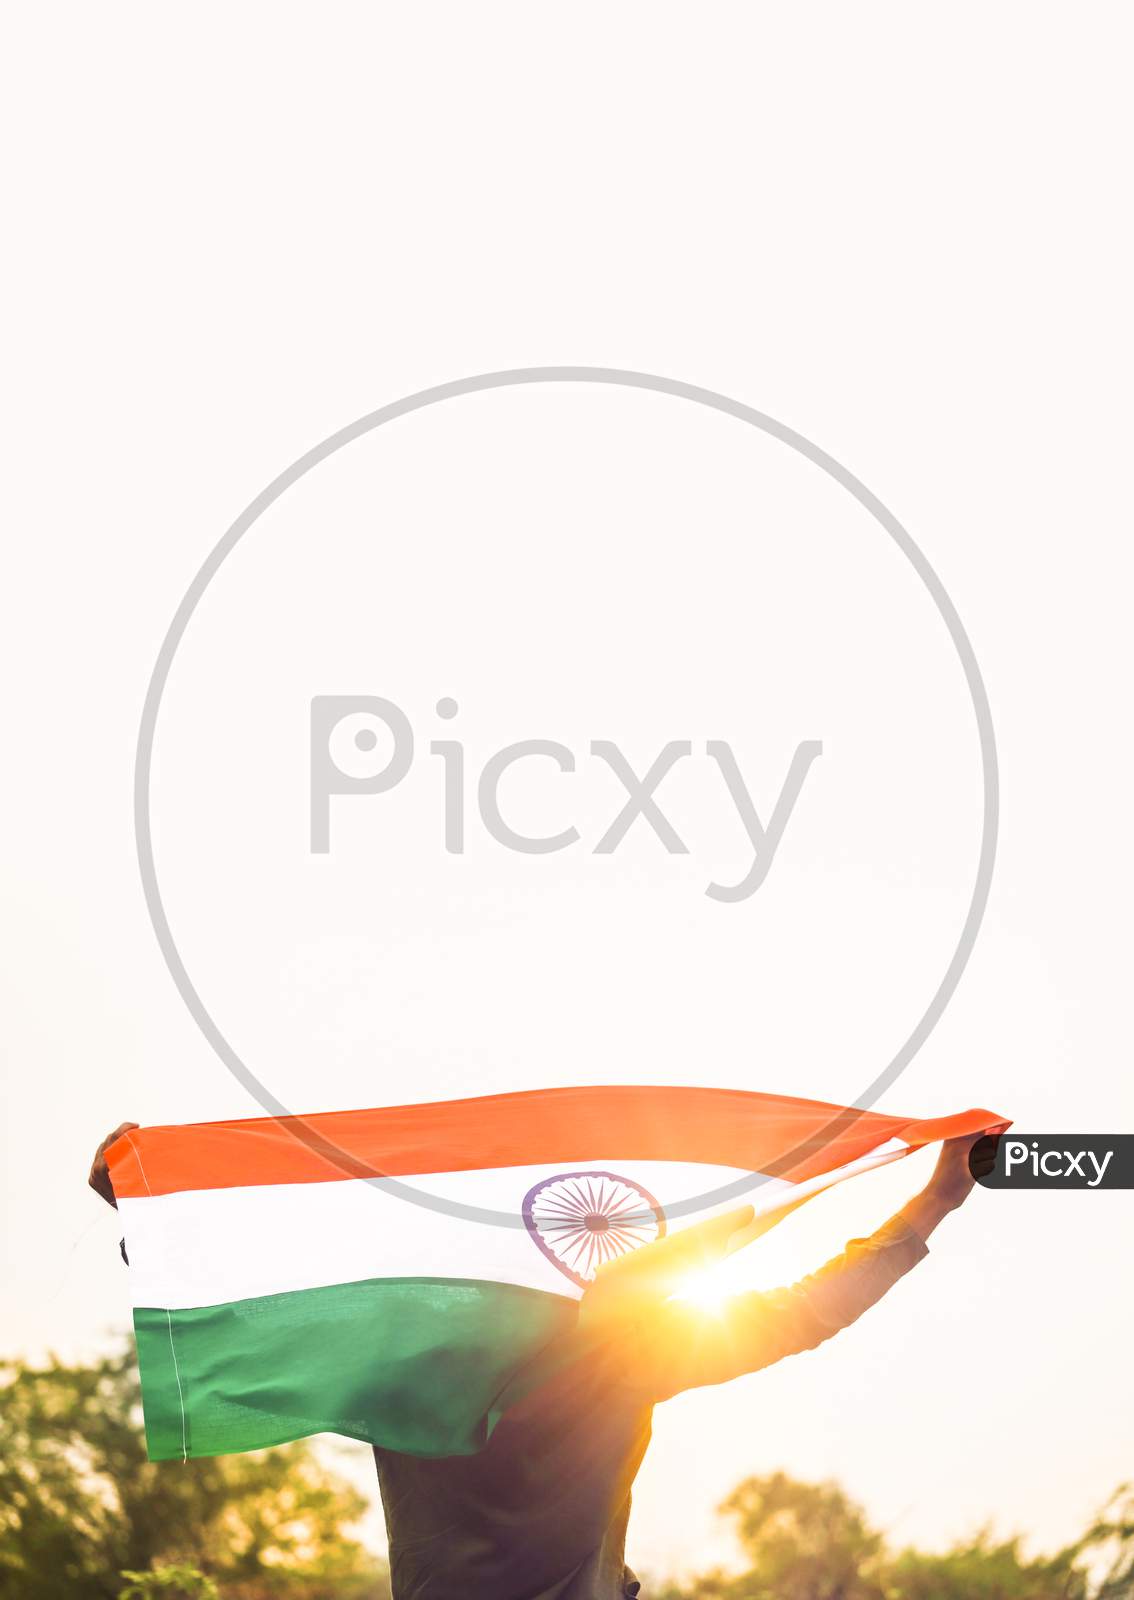 Indian flag hold by Boy/Person